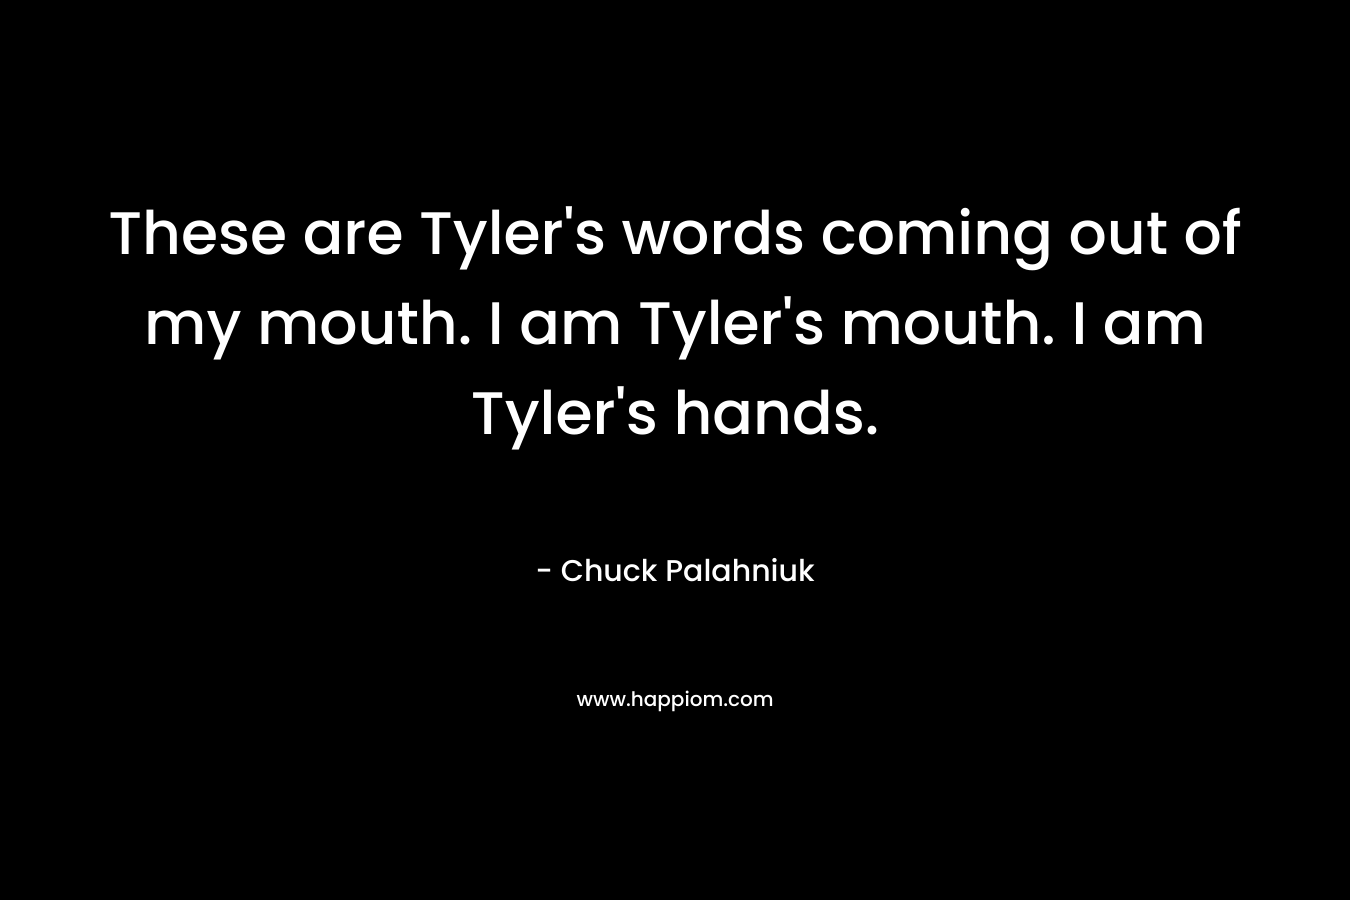 These are Tyler's words coming out of my mouth. I am Tyler's mouth. I am Tyler's hands.